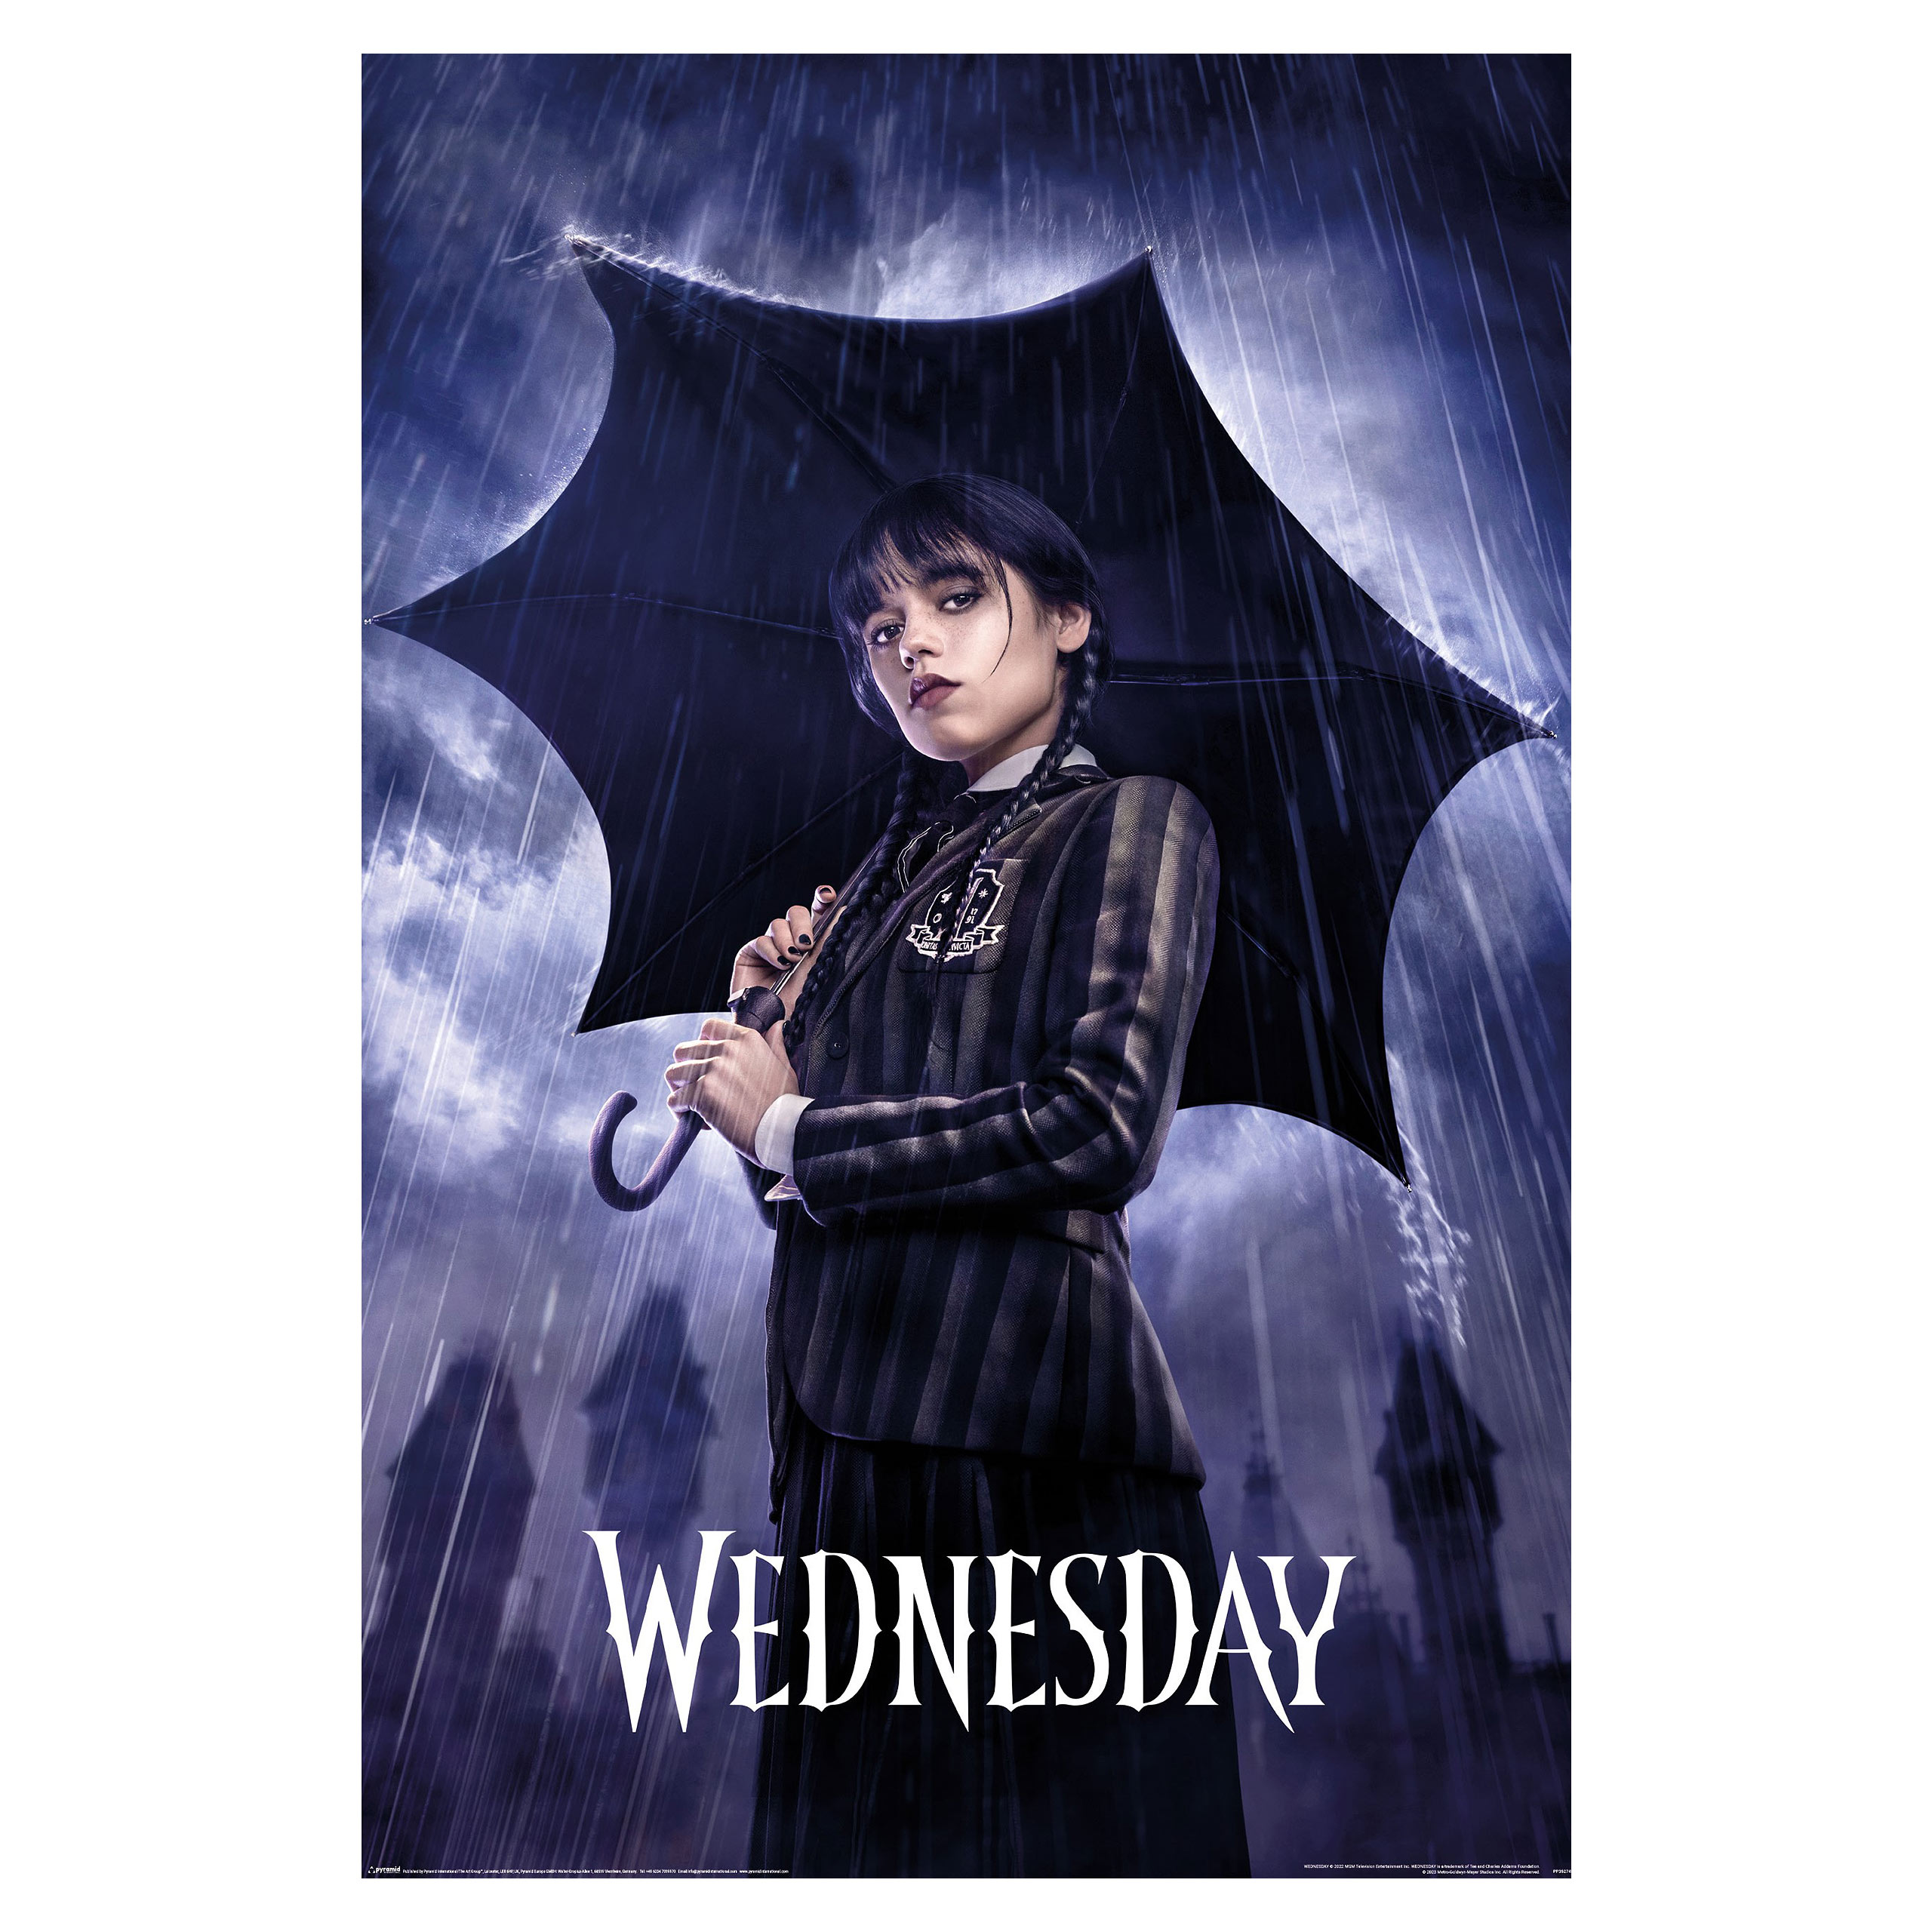 Wednesday - Downpour Teaser Maxi Poster